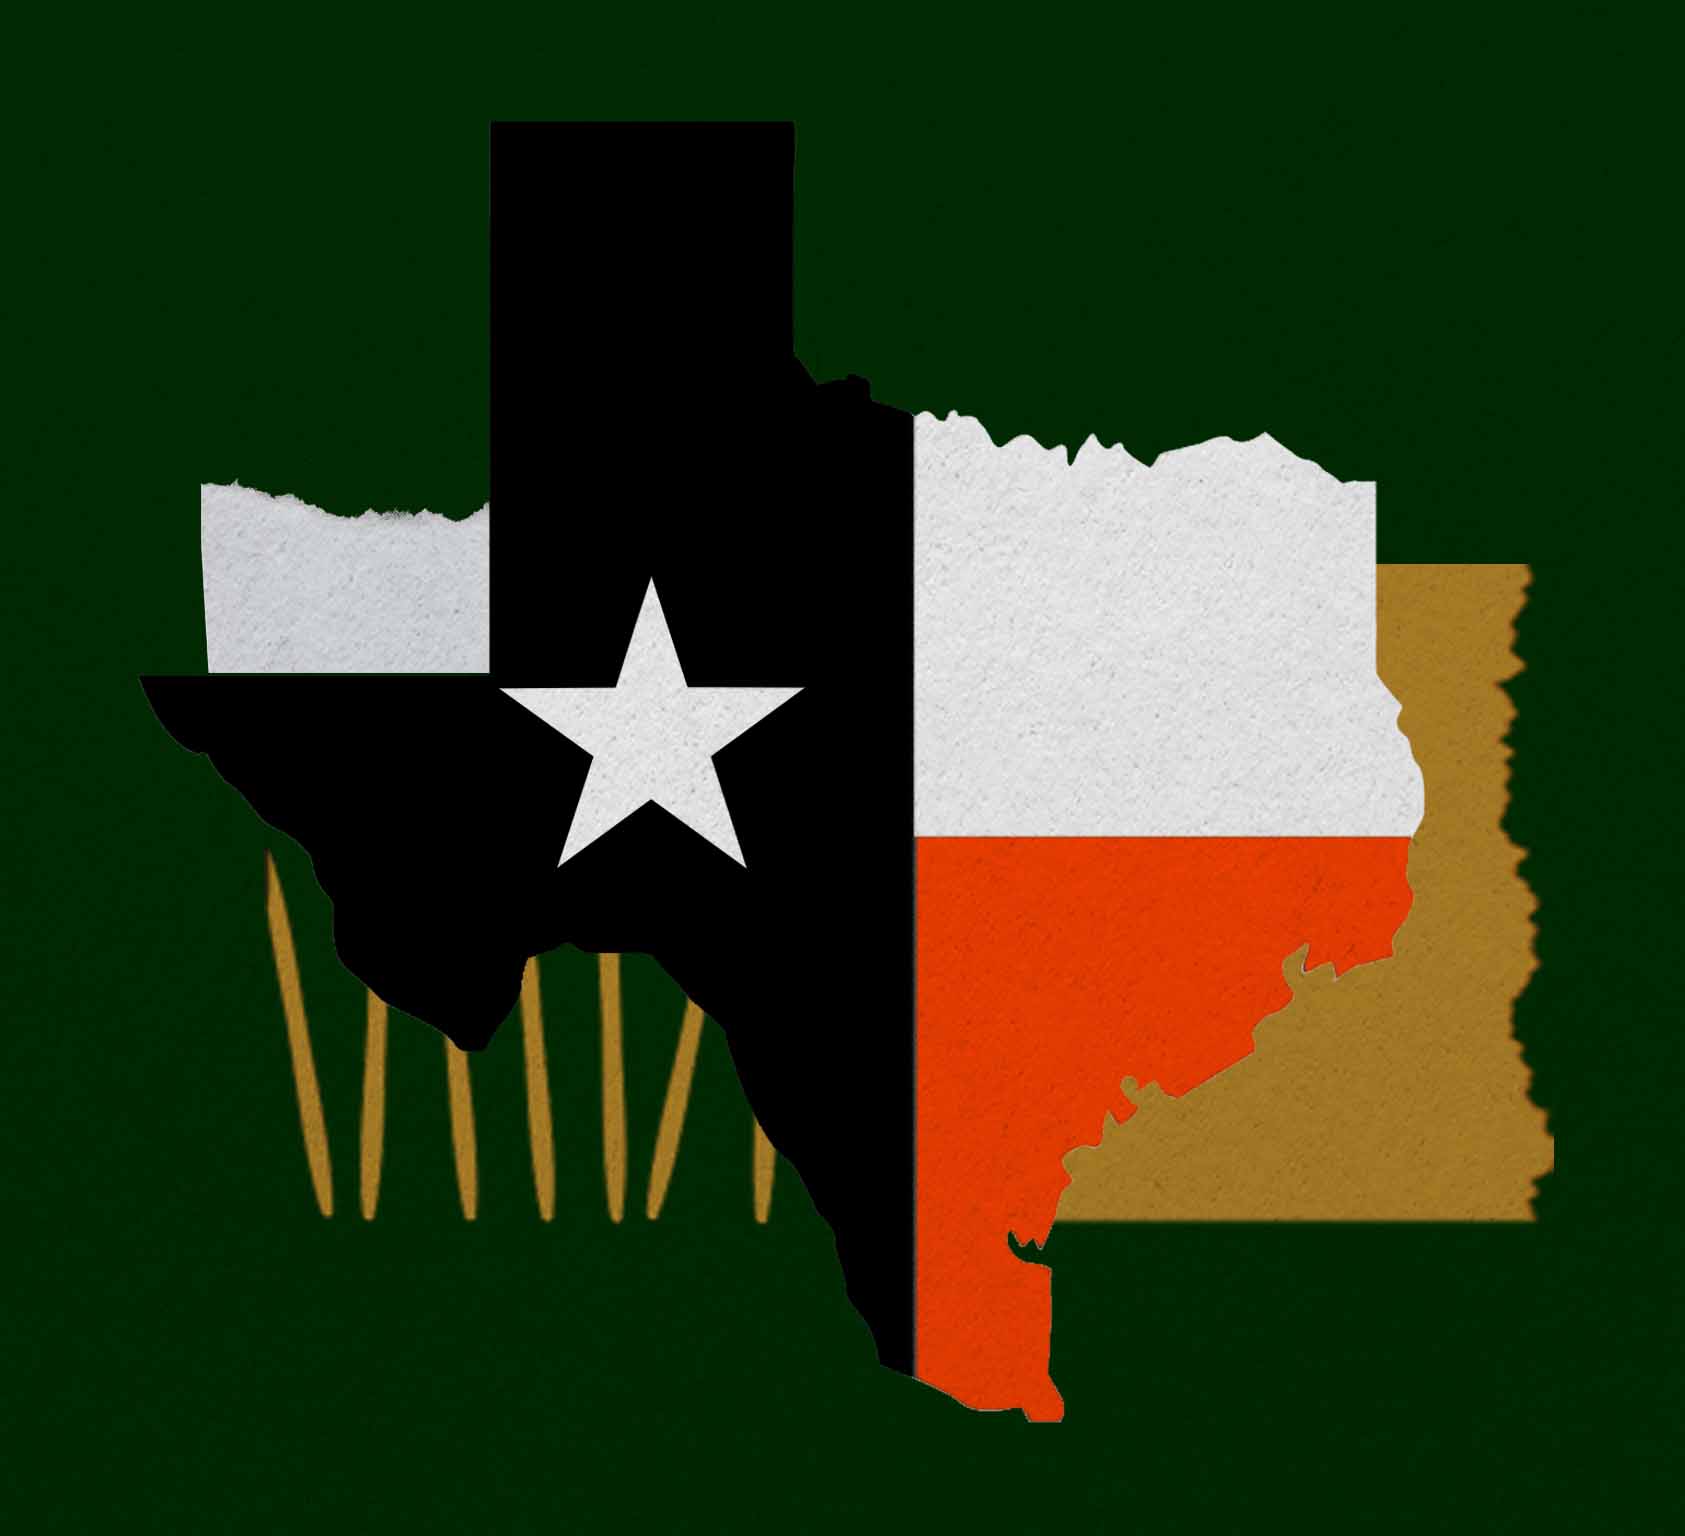 Outline of state of Texas inset with state flag over a vibrant background.